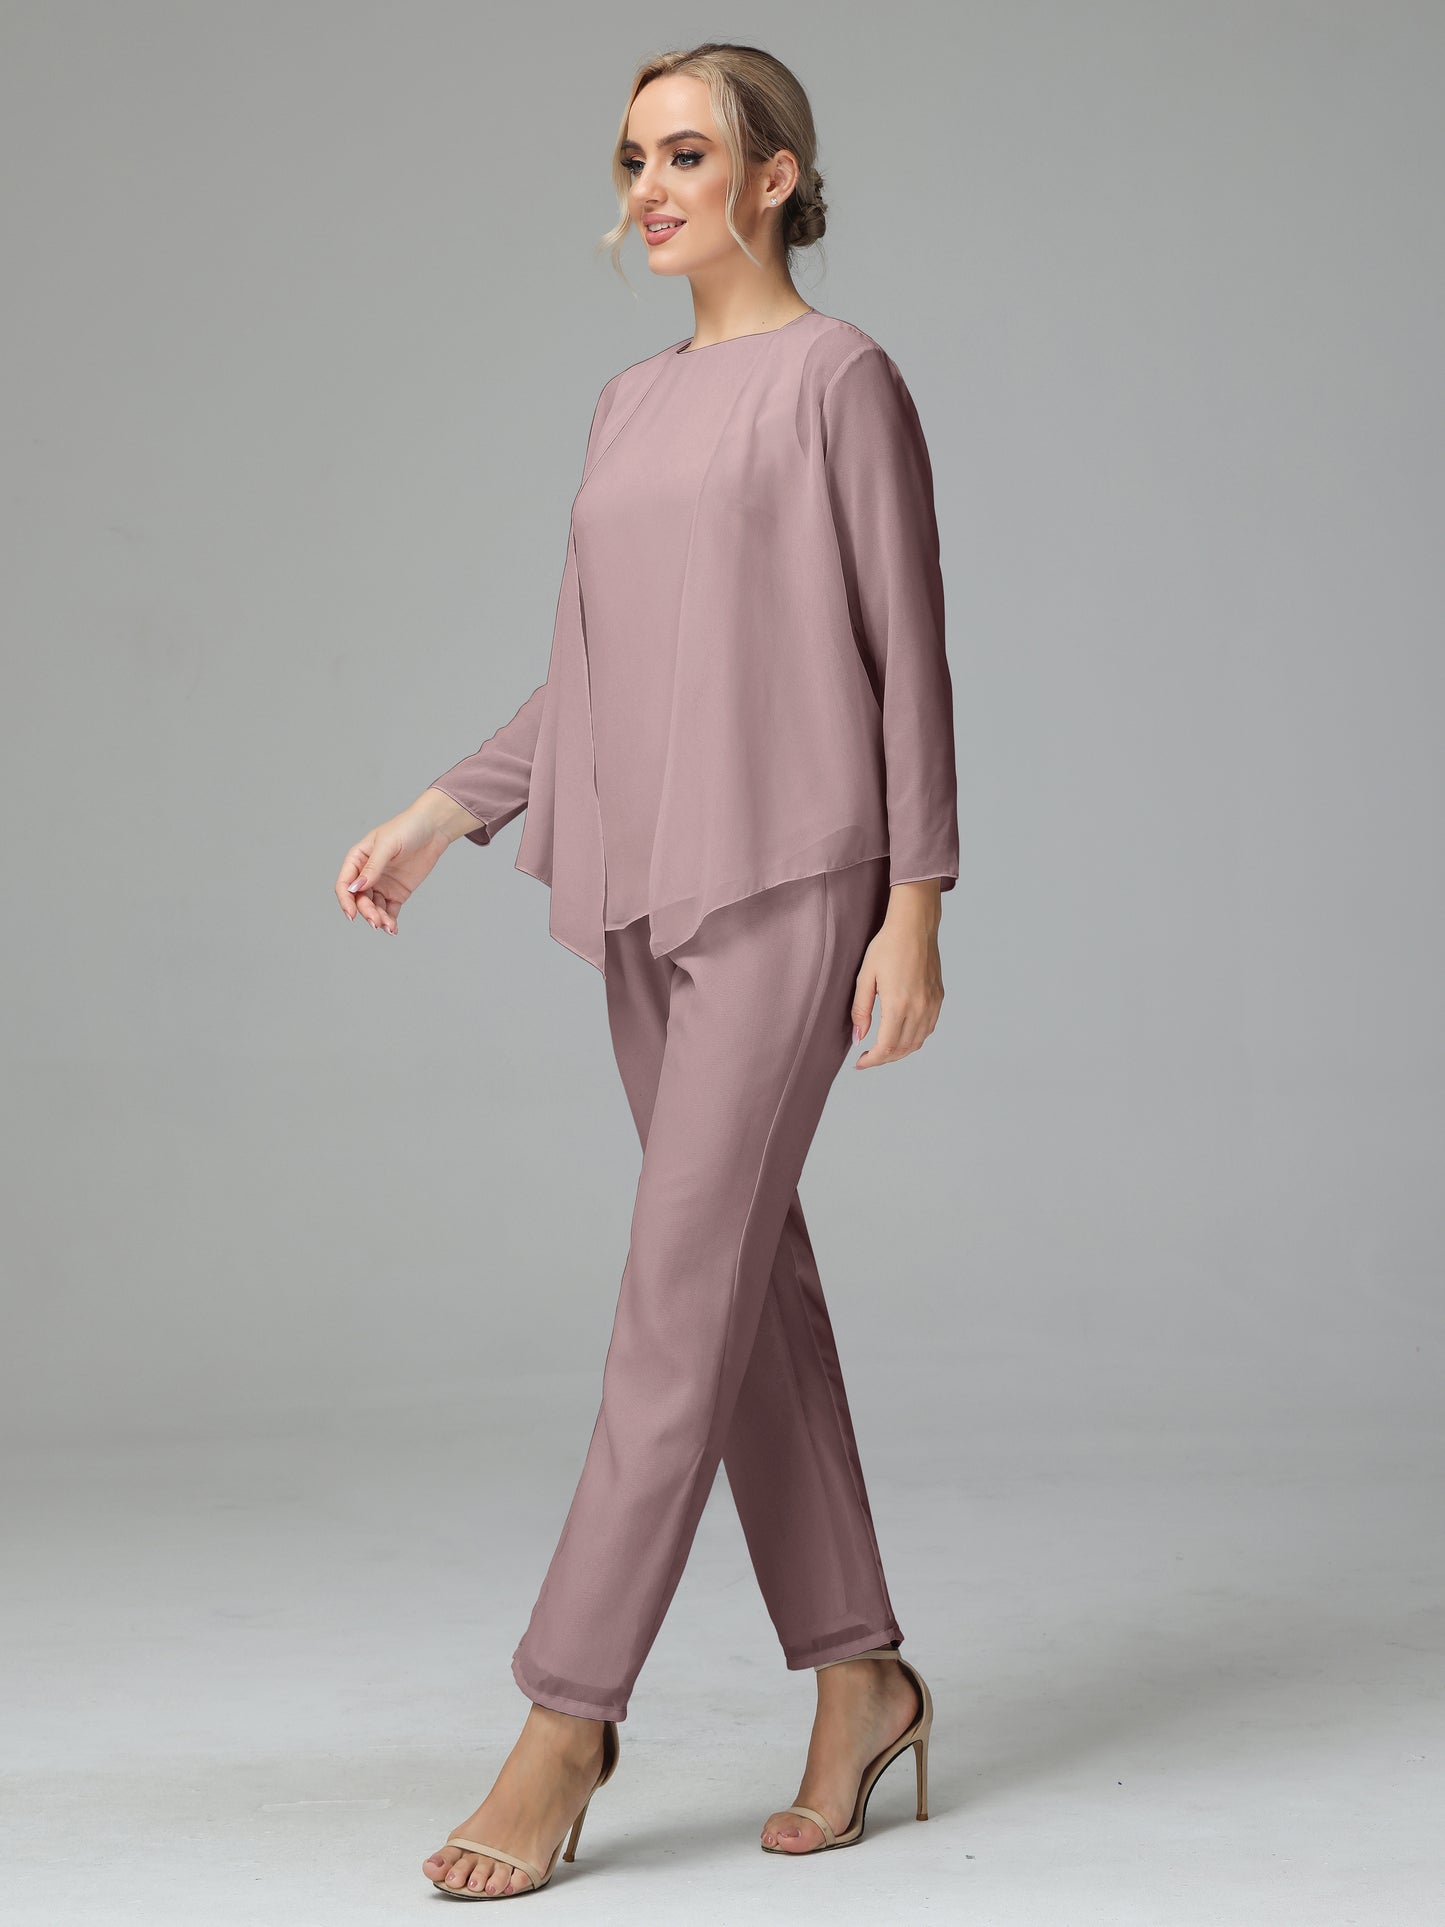 Long Sleeves 3 Pieces Chiffon Mother of Bride Dress Pant Suits